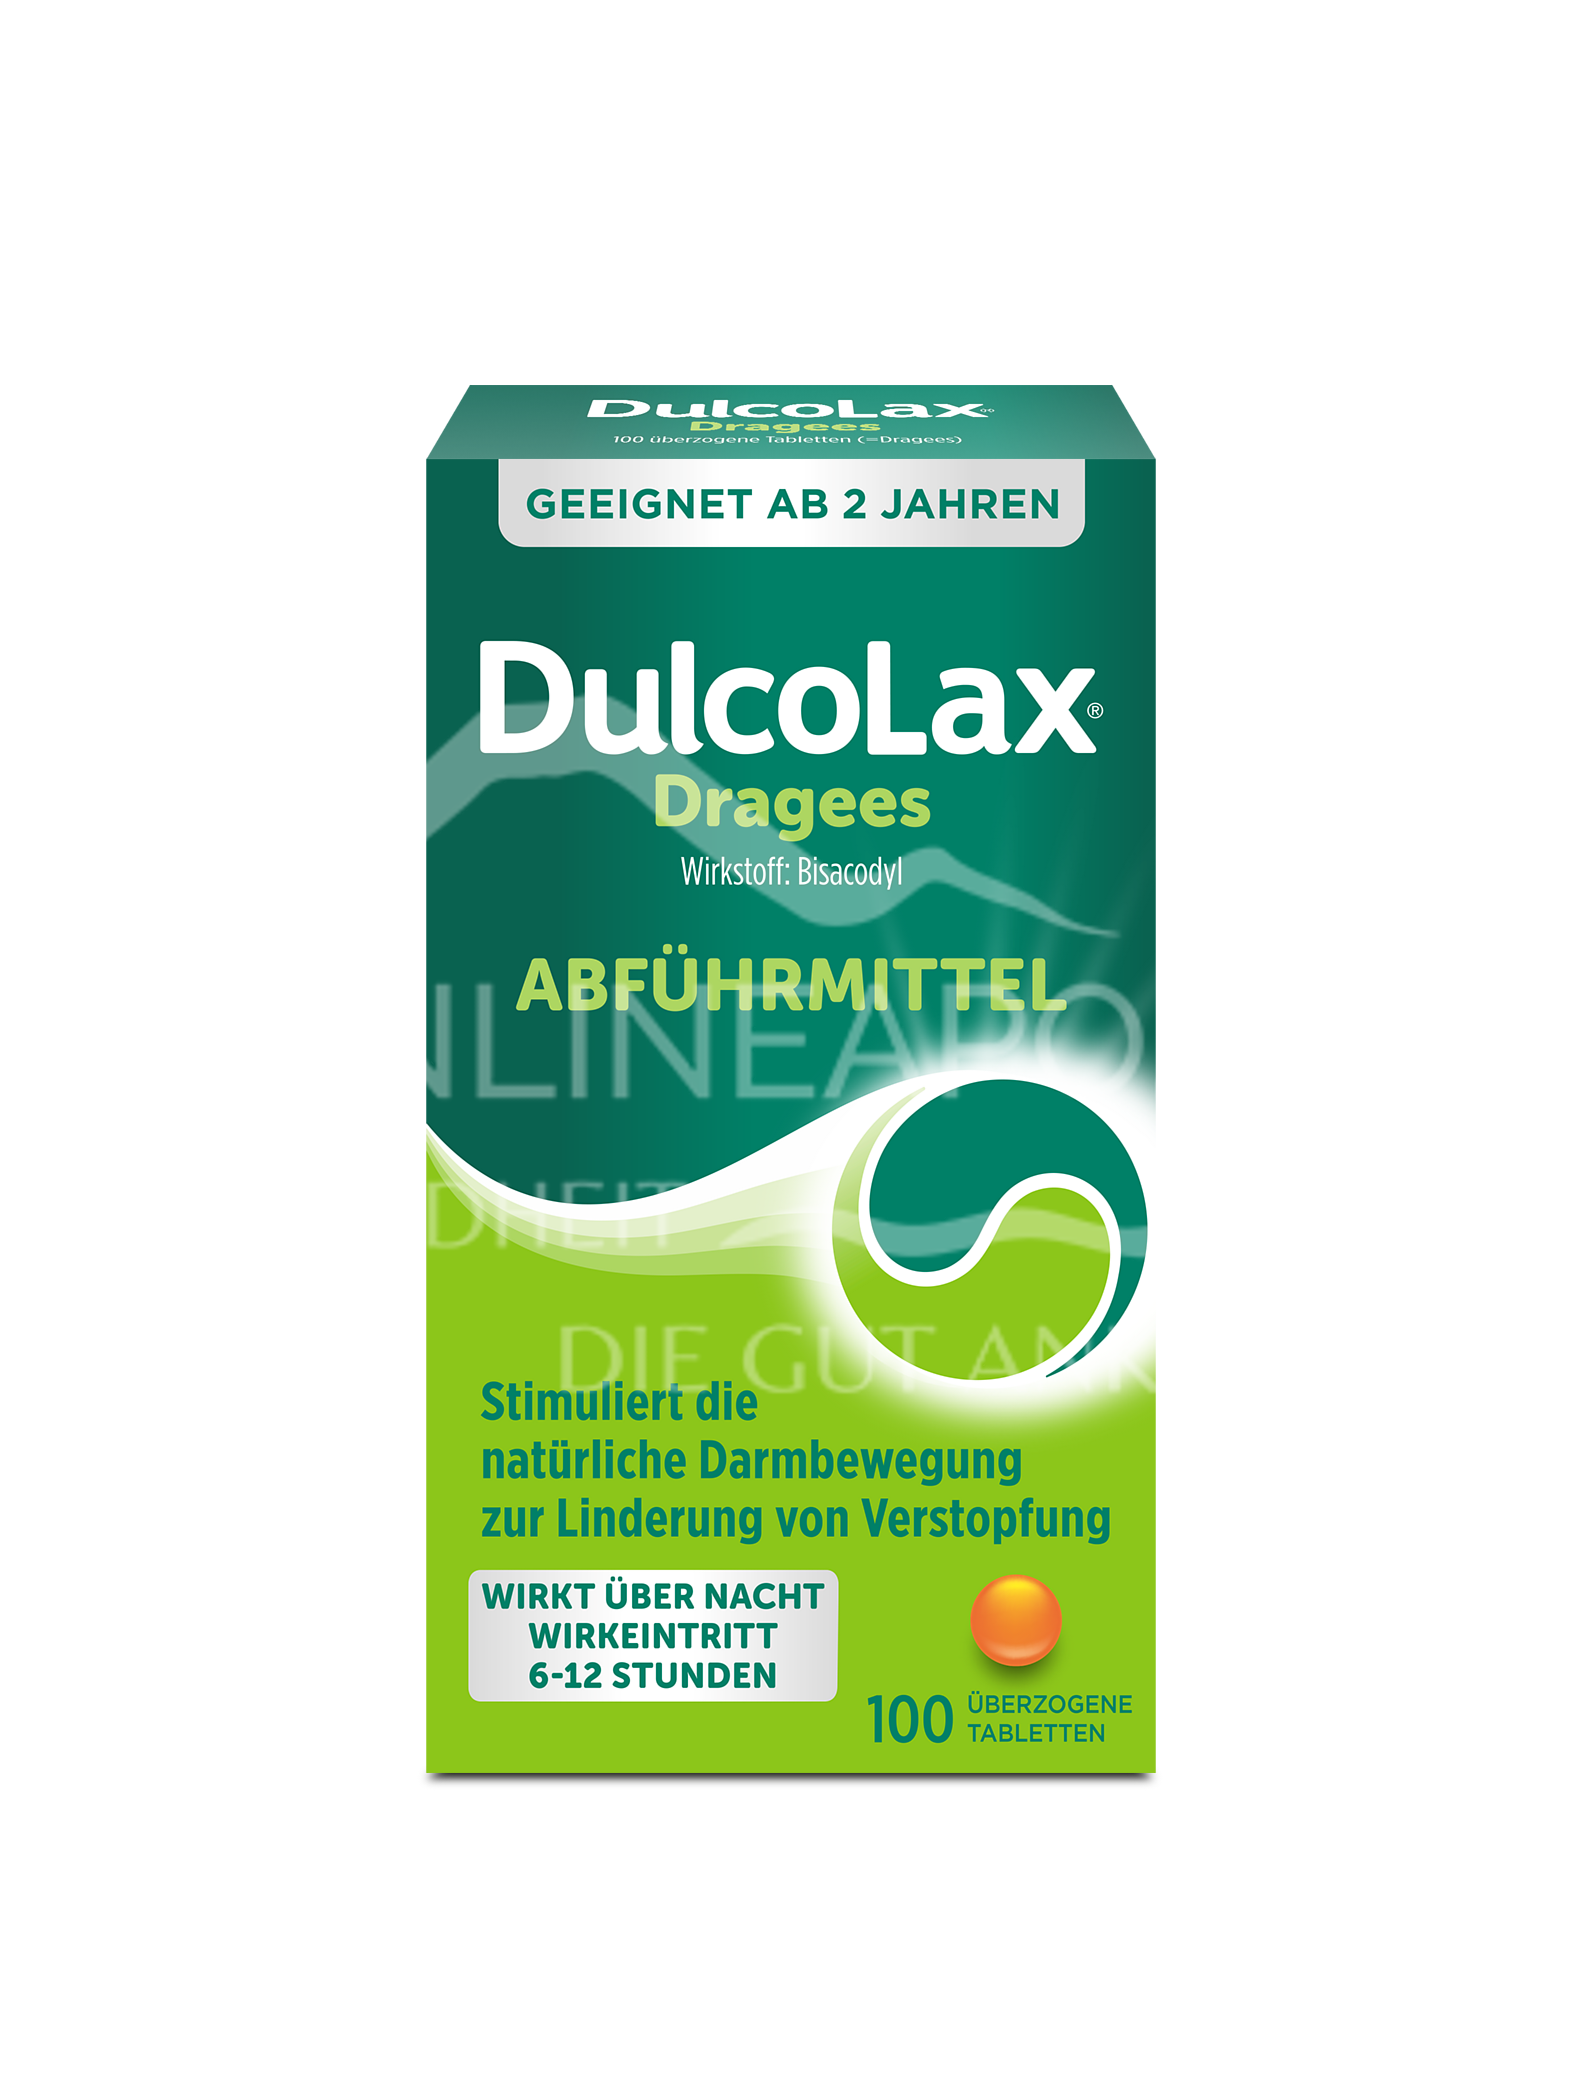 DulcoLax® Dragees